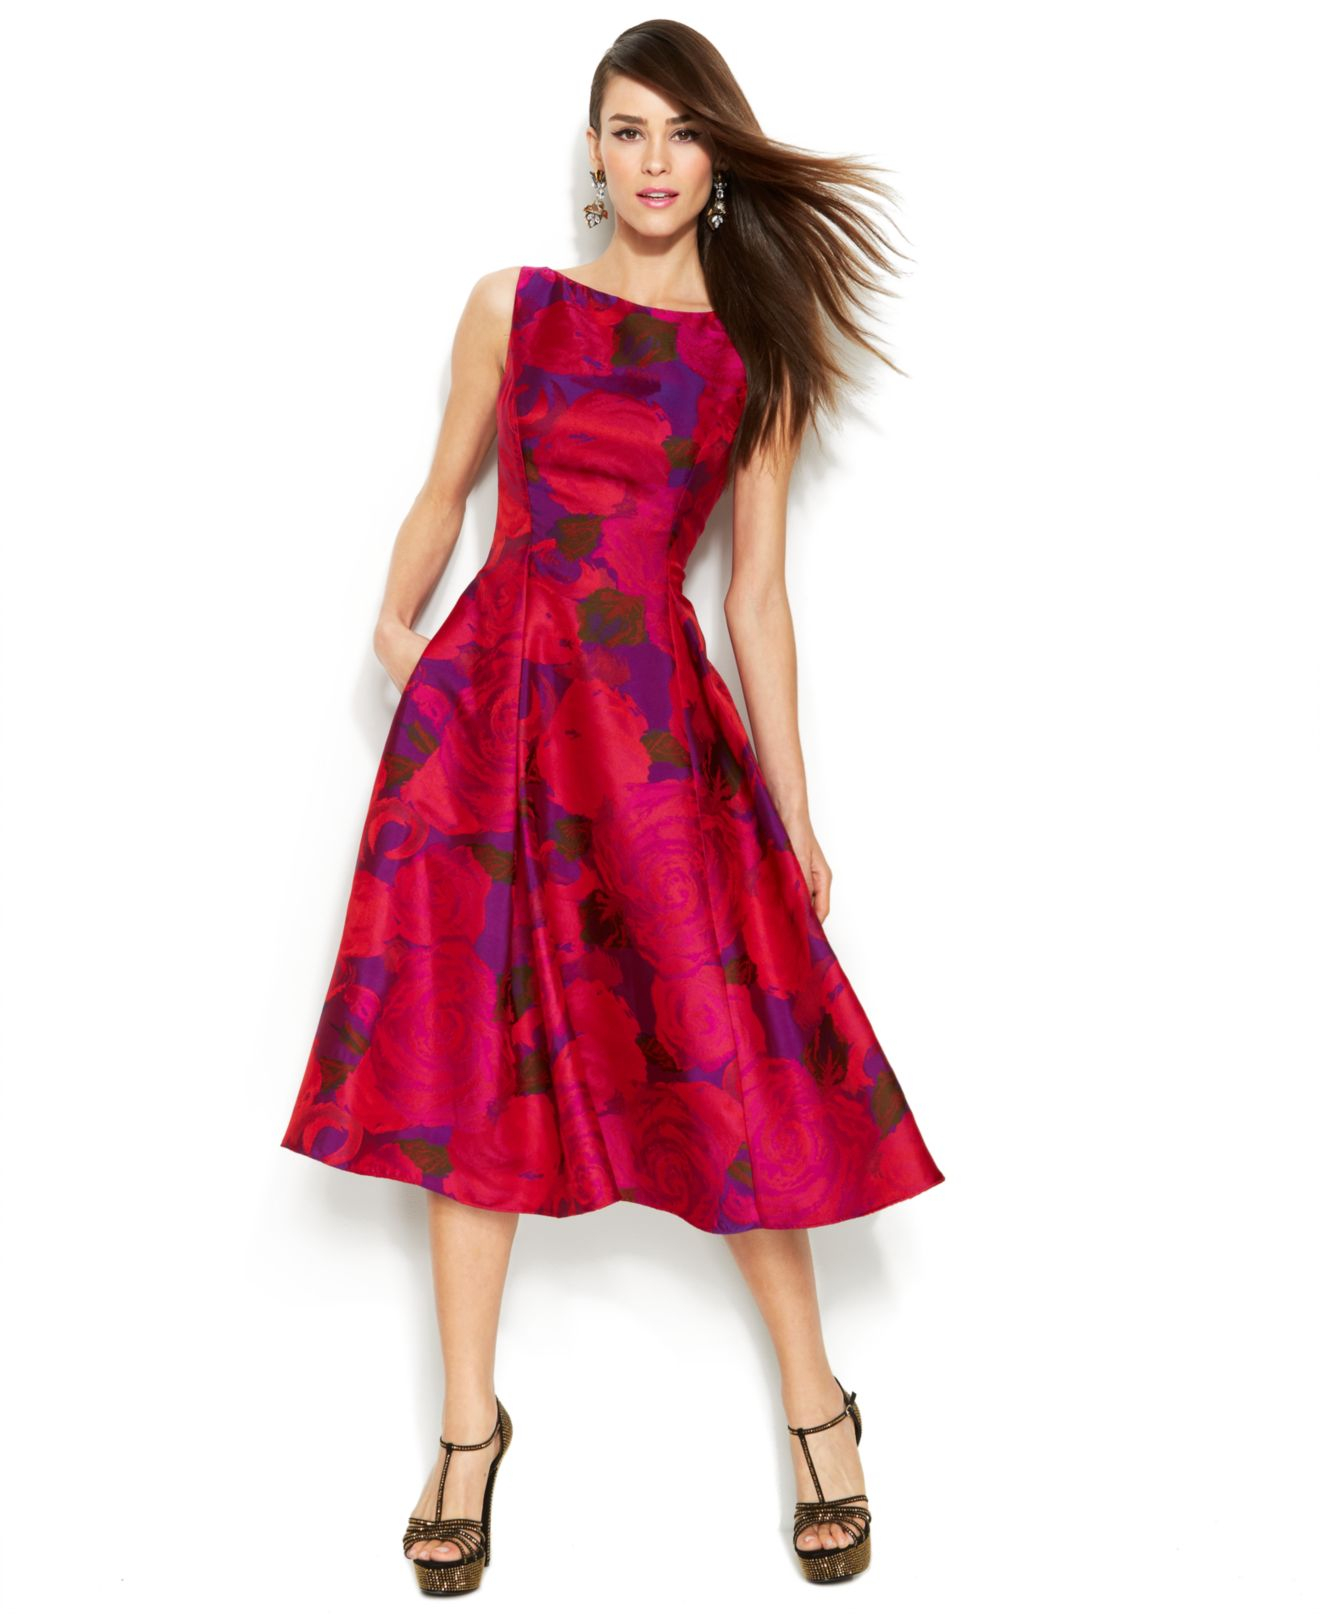 Lyst - Adrianna Papell Sleeveless Rose-Print Midi Dress in Red